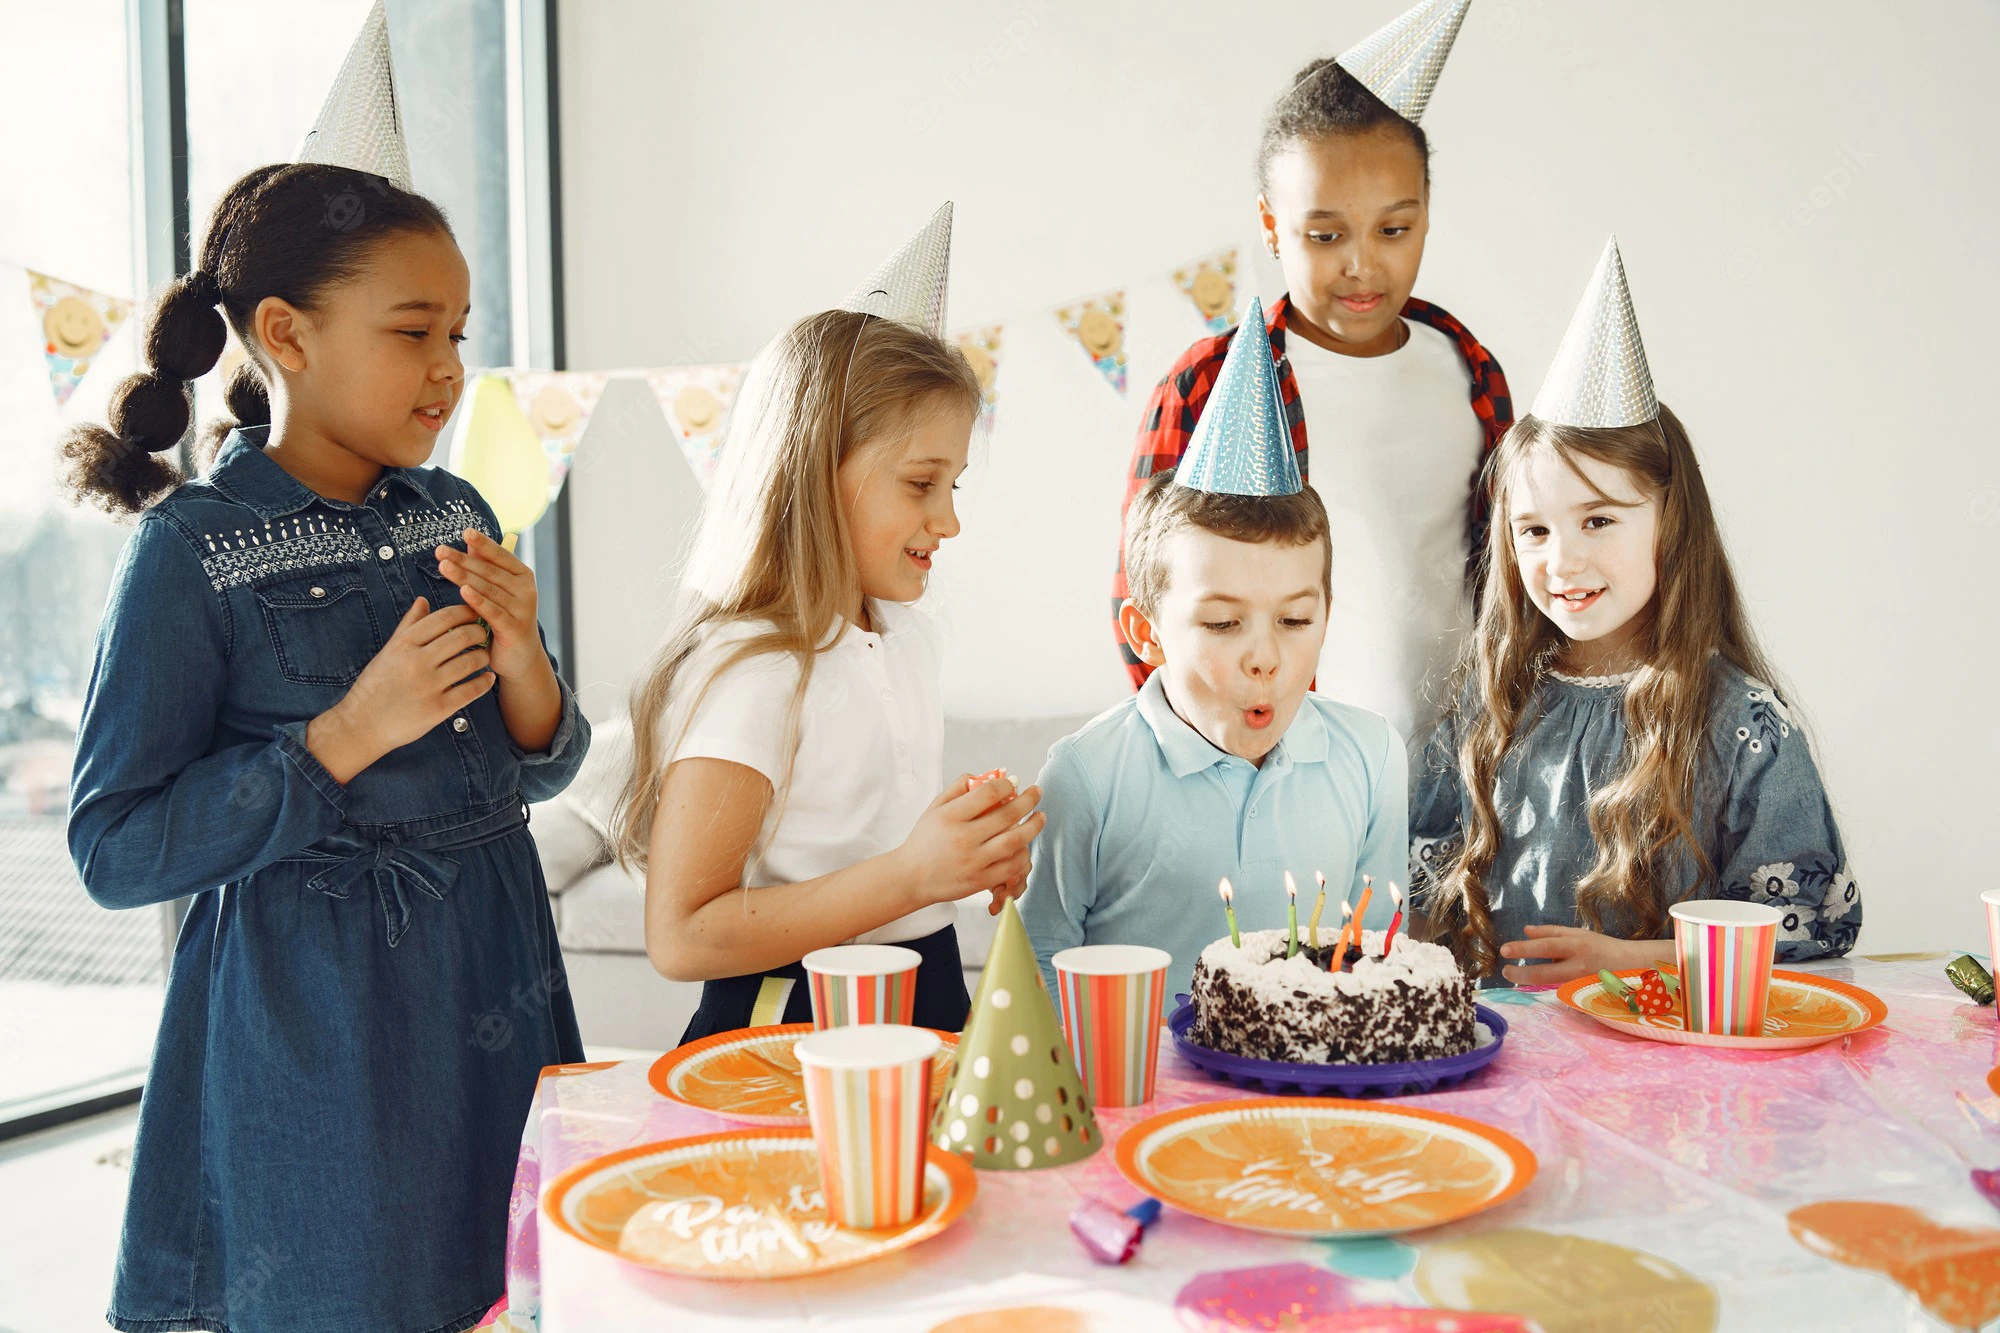 Kids Birthday Party within Their Sweetest Memories